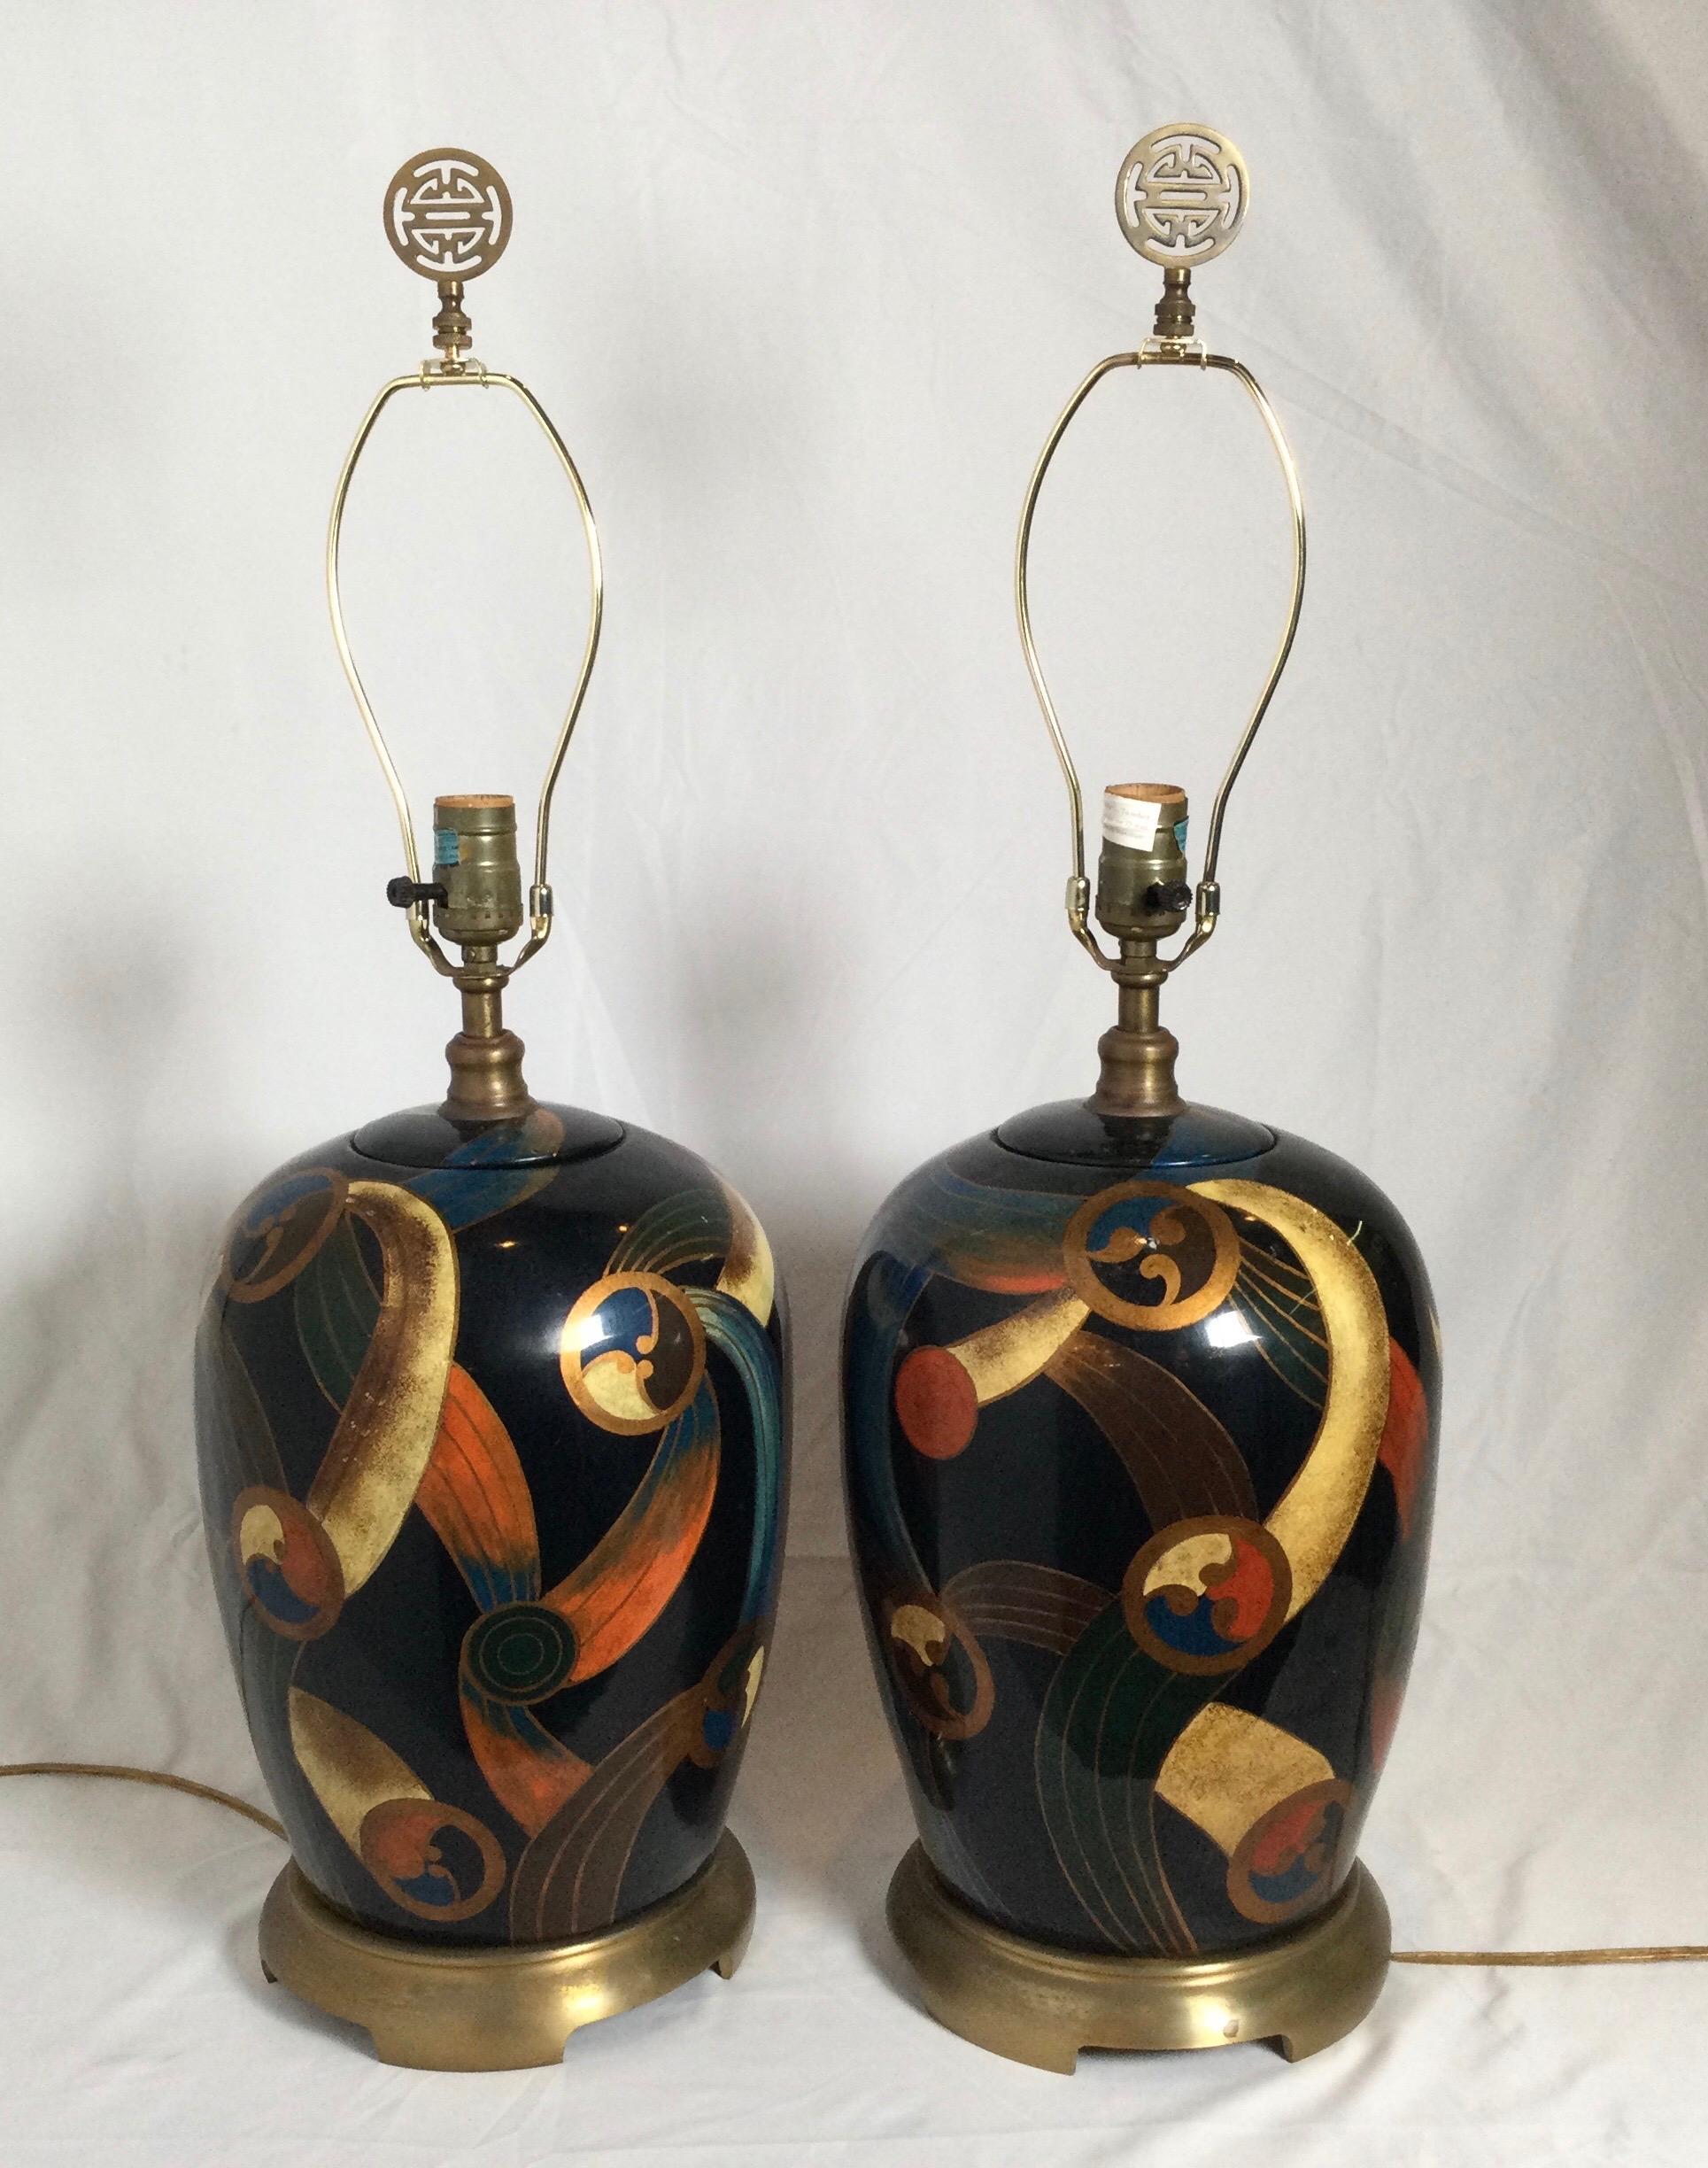 A pair or deco modern style bulbous lamps with a mod hand painted design. The dark background with vibrant color of orange, blue yellow with burnished brass bases. The shades are for photographic purposes only and not included. 26.5 high with a